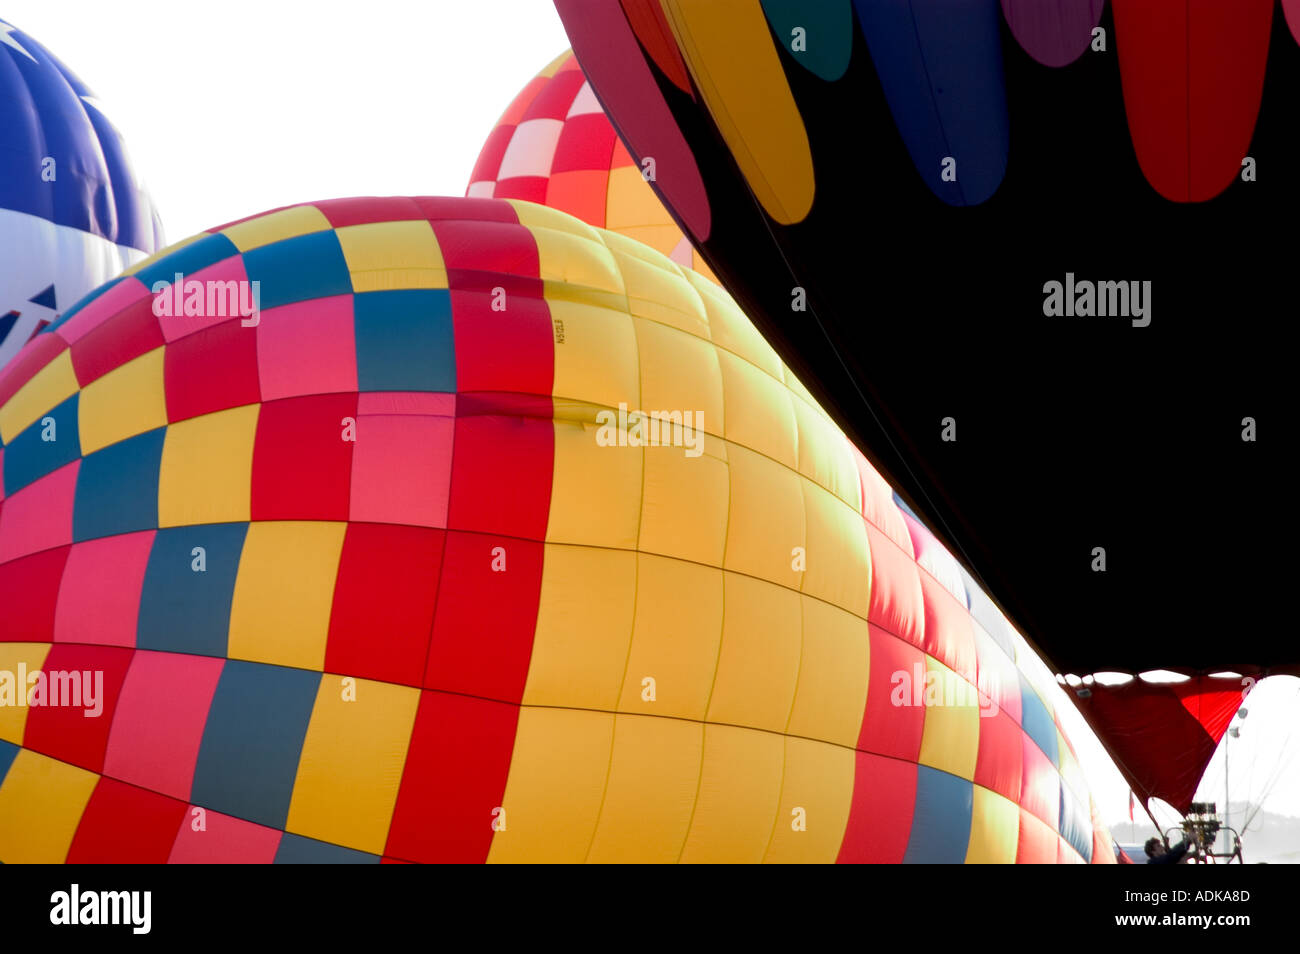 Hot air balloons being inflated Stock Photo